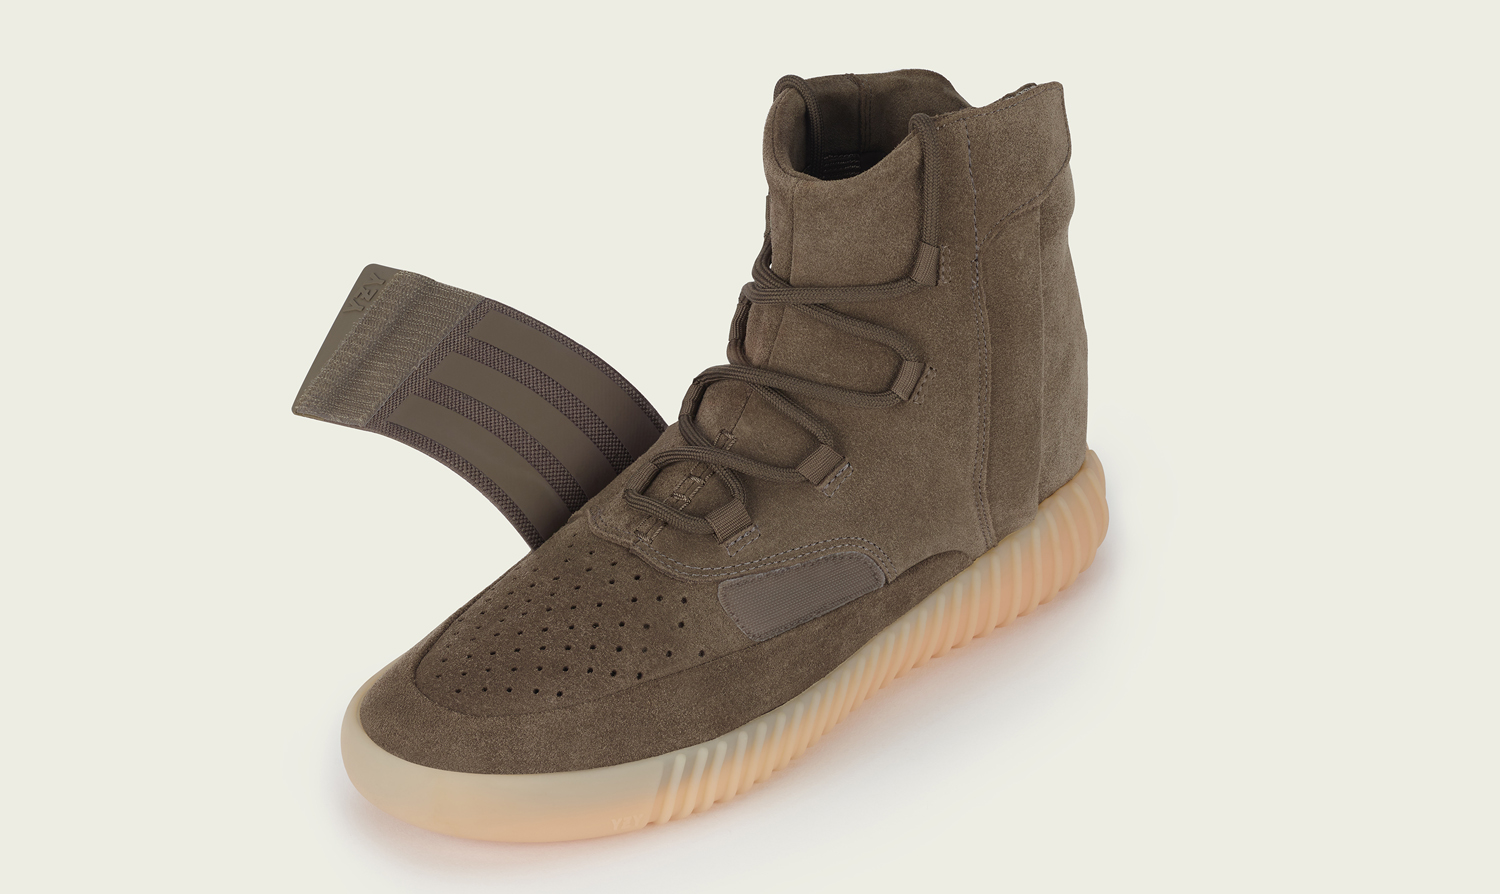 Chocolate" Adidas Yeezy 750 Boost Reservations Today